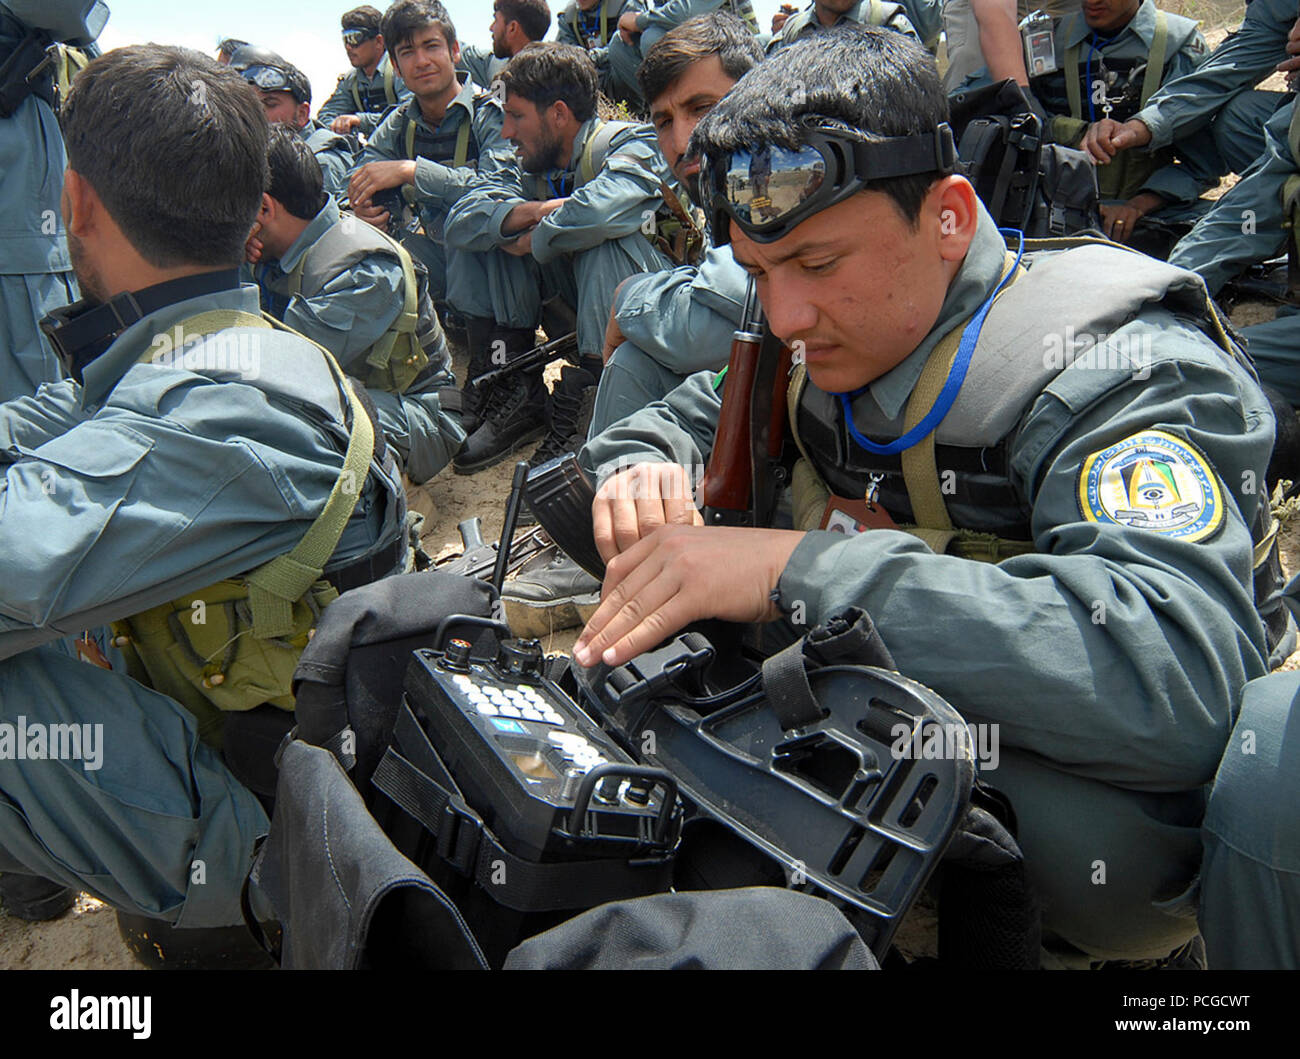 KABUL, Afghanistan (April 20, 2010) – An Afghan National Civil Order Police (ANCOP) Officer checks his portable radio settings during training at a Kabul facility.  Members of the elite police force received training in traffic control and communications gear as they prepare for operations in Afghanistan. (US Navy Stock Photo